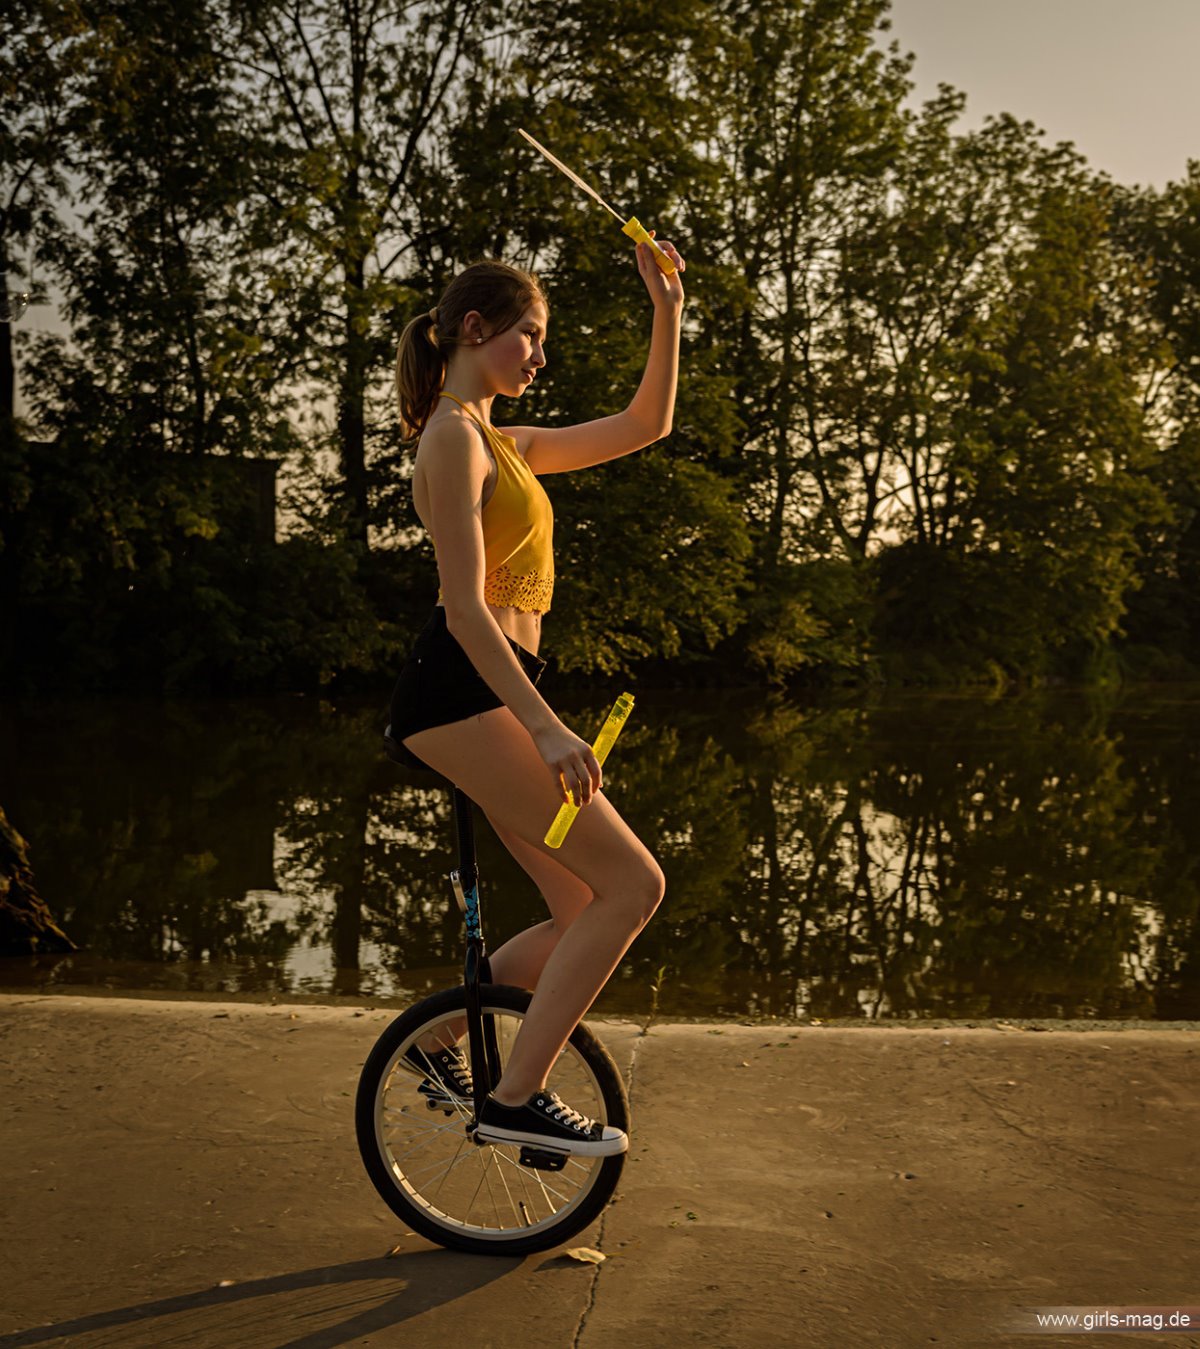 Girls Mag Annika Bubbles on a Unicycle 0121 0988565122.jpg